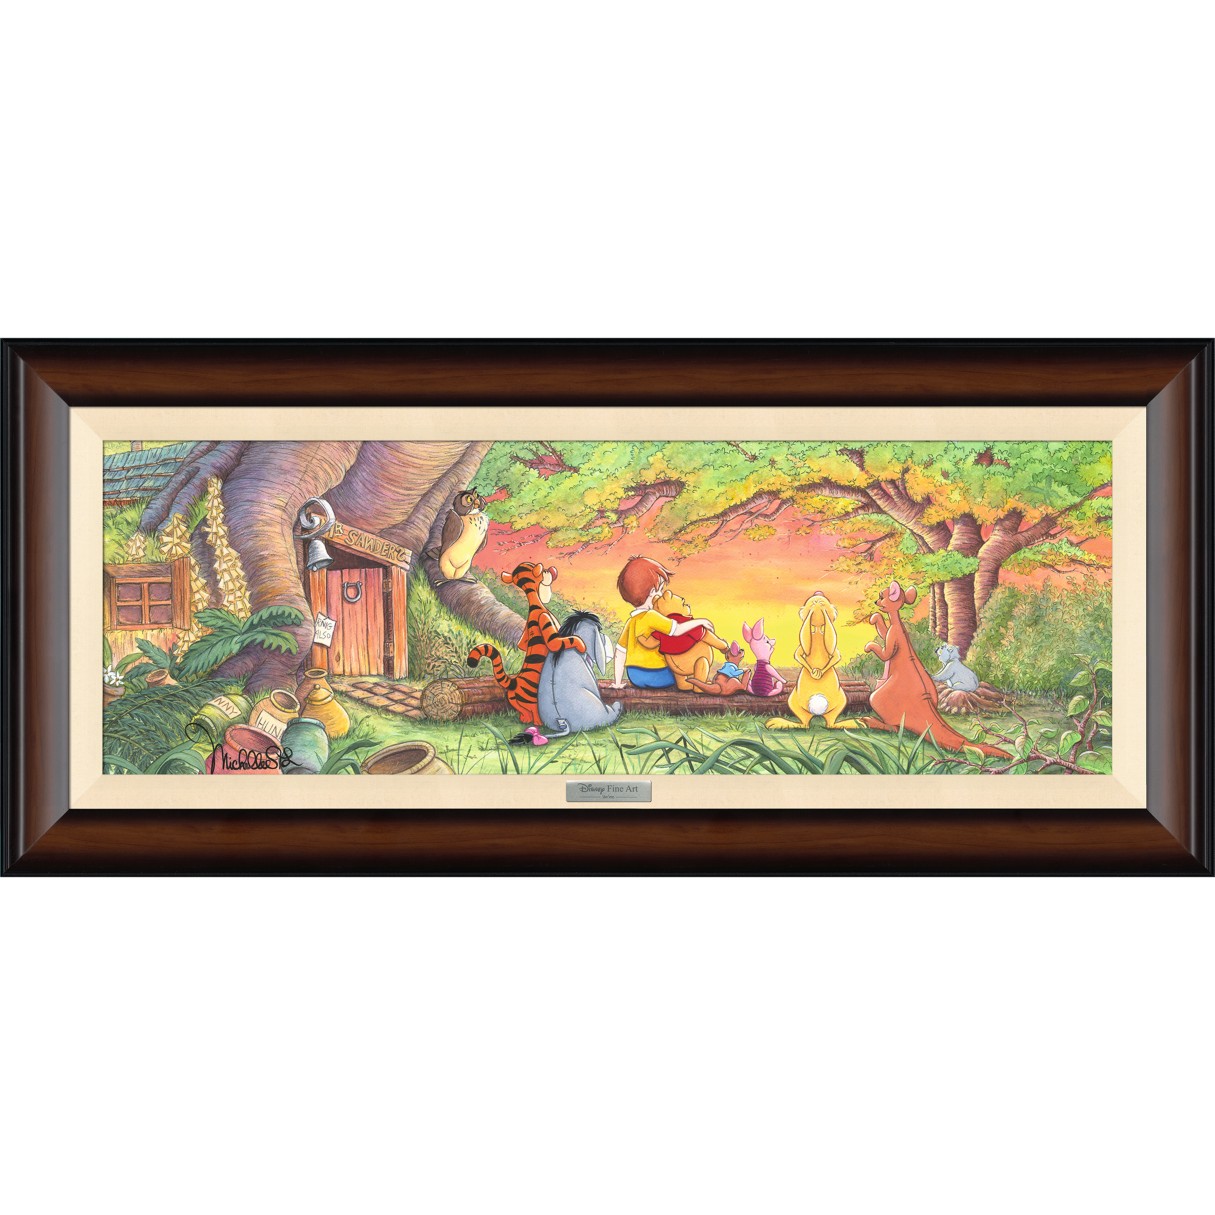 Winnie the Pooh and Pals ''Sunset in the Woods'' Framed Canvas Artwork by Michelle St.Laurent – Limited Edition